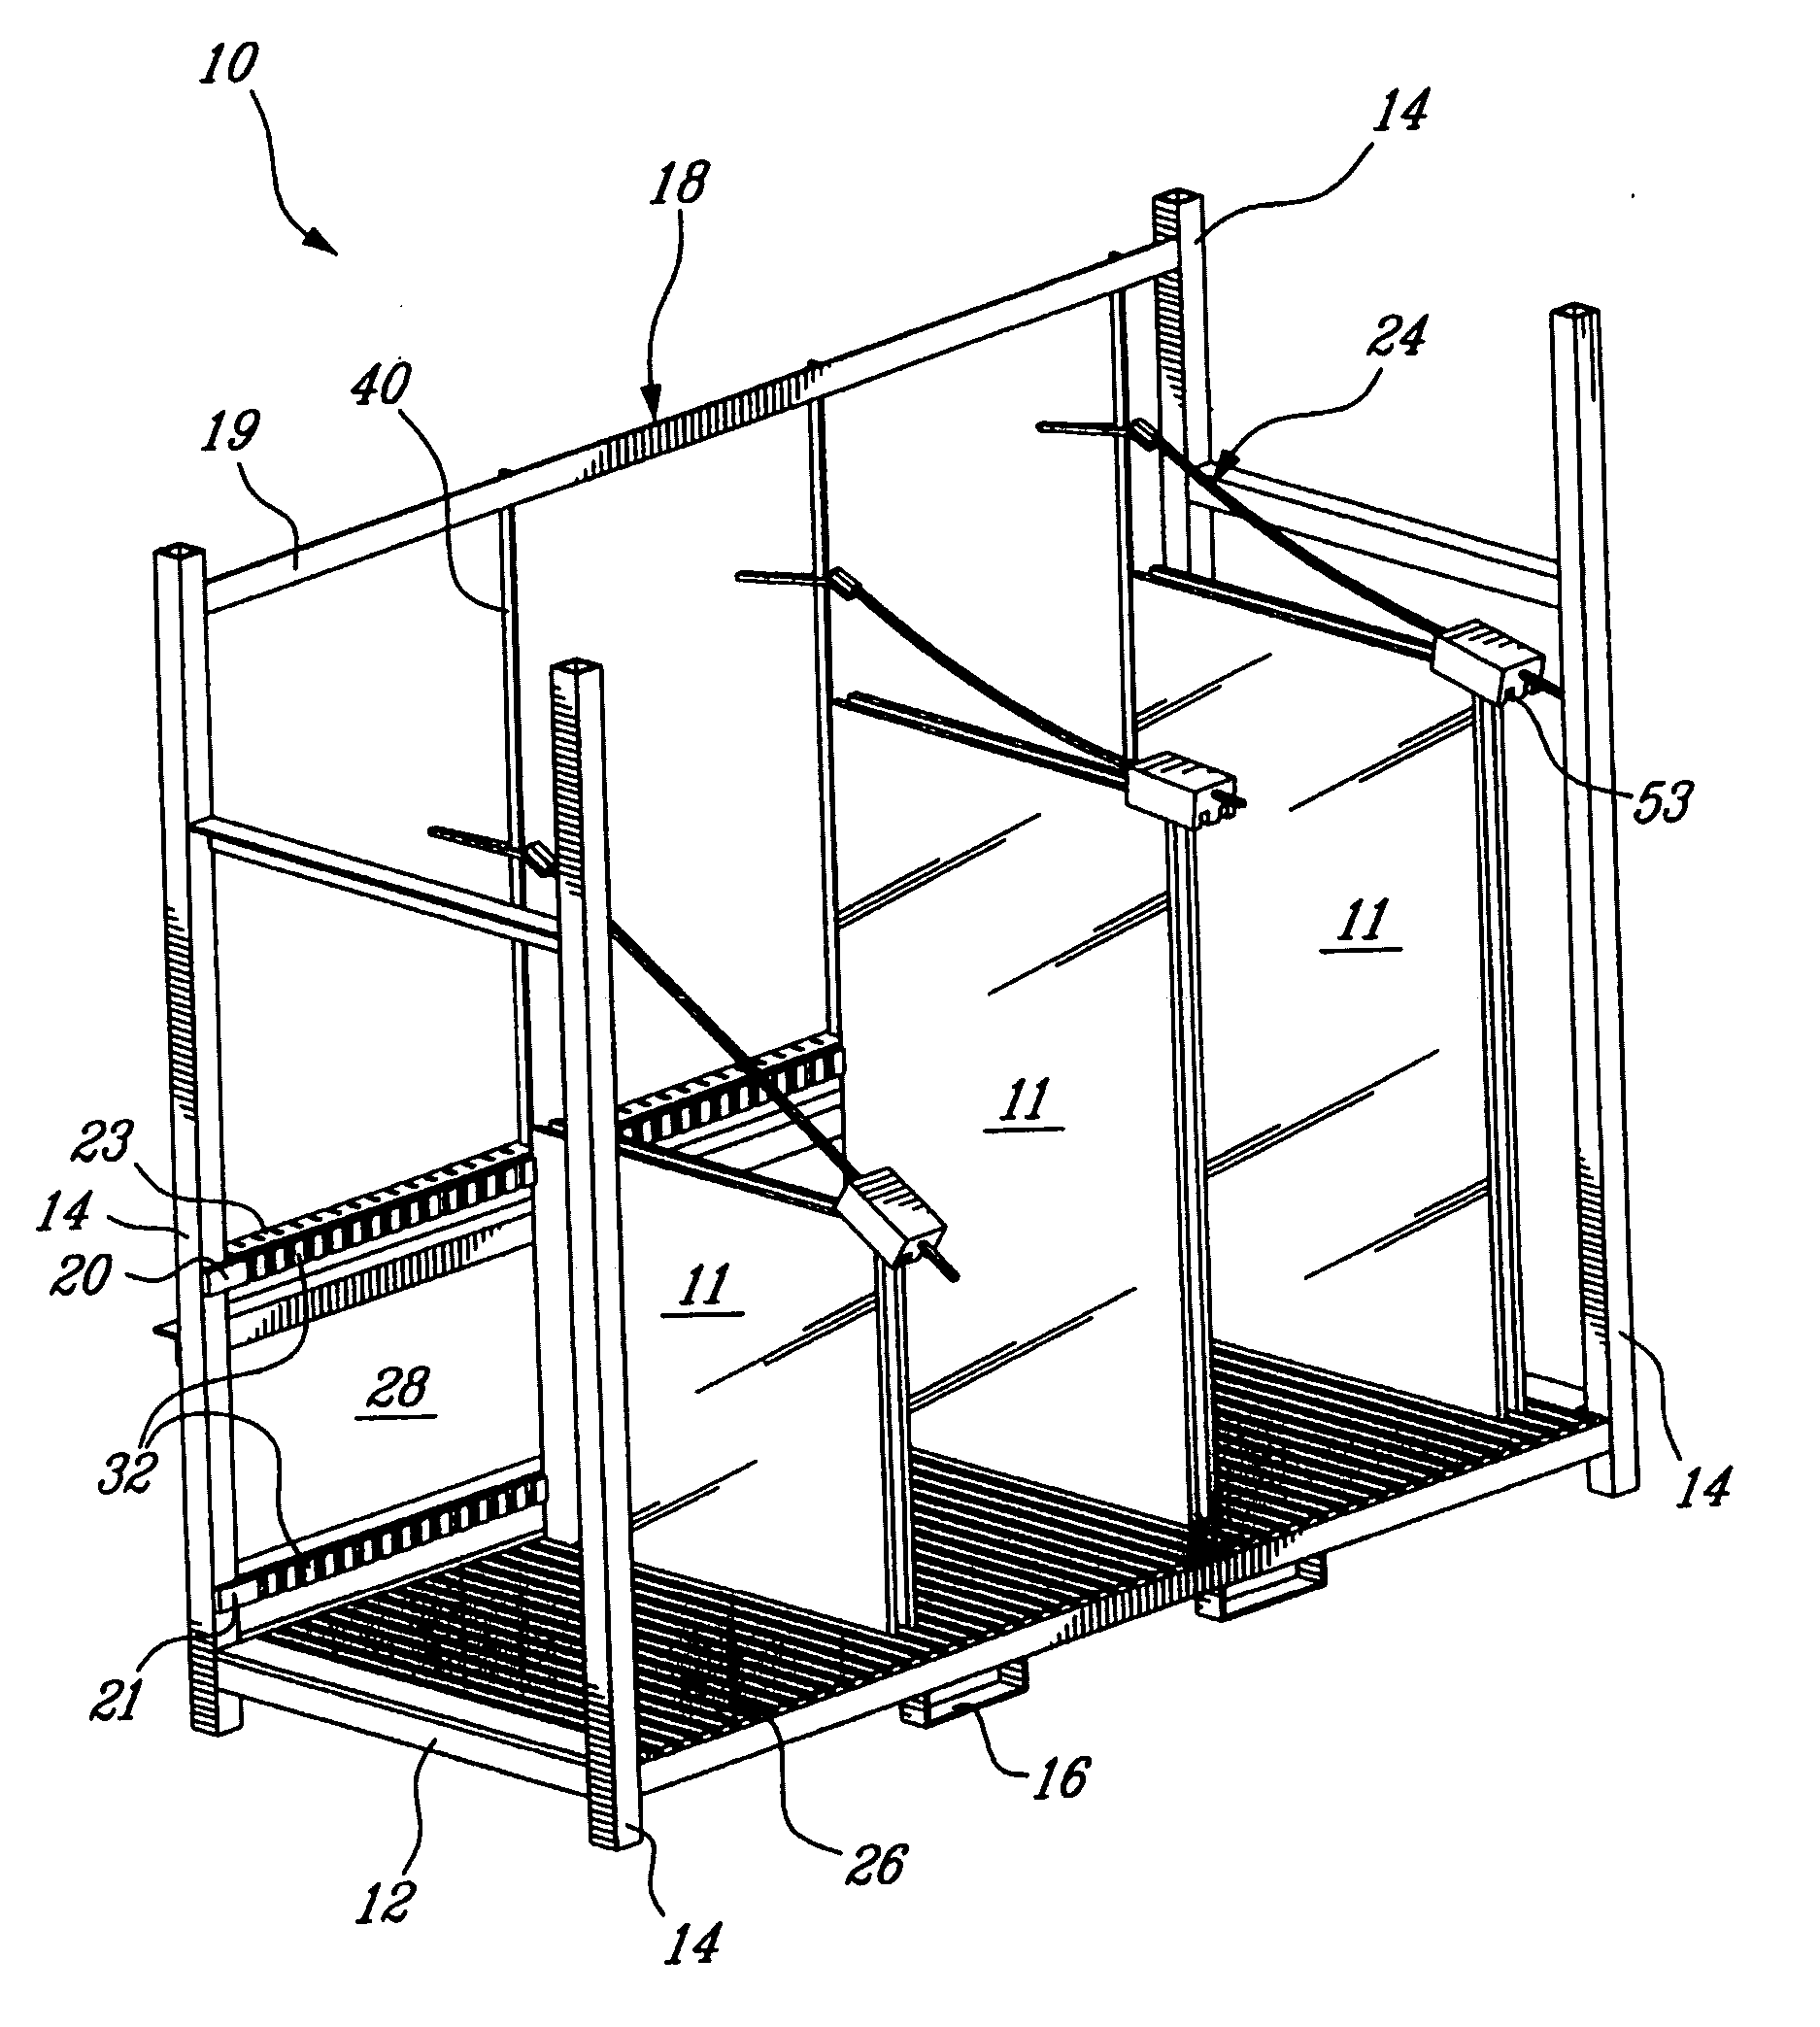 Device for retaining panels